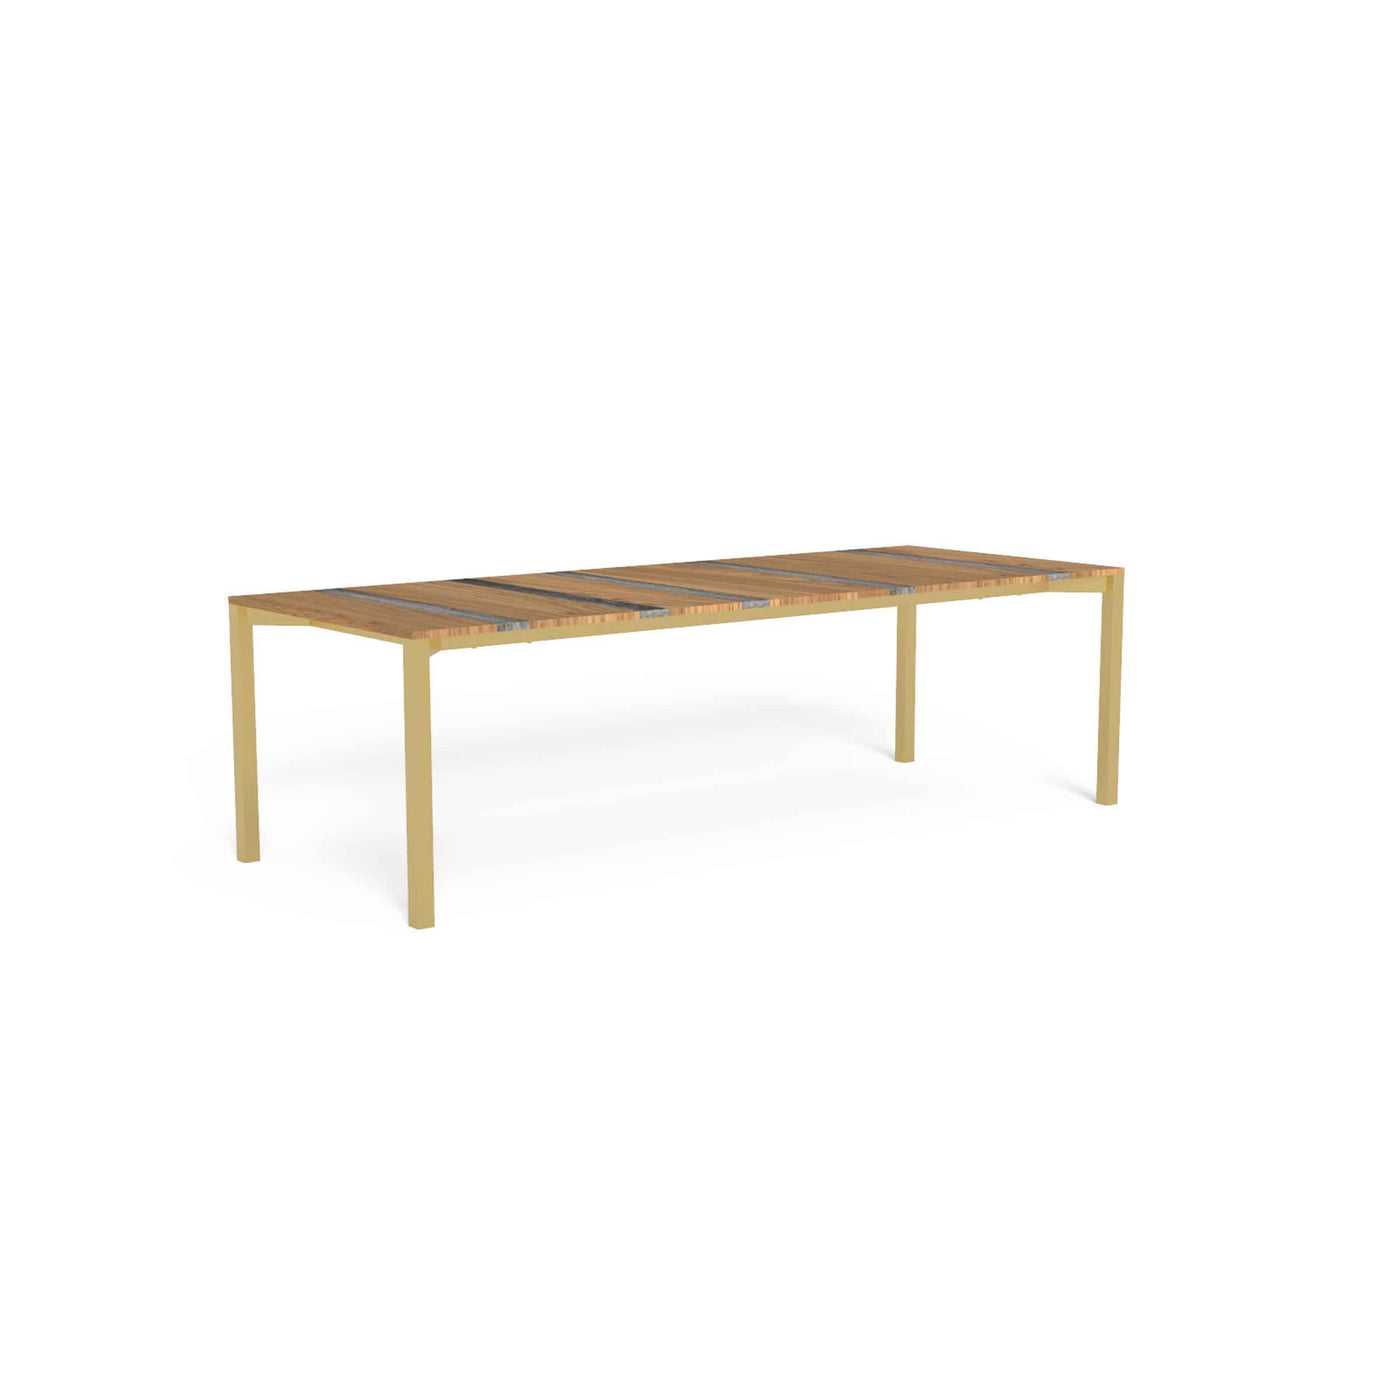 Outdoor Wood and Steel Dining Table CASILDA by Ramón Esteve for Talenti 017